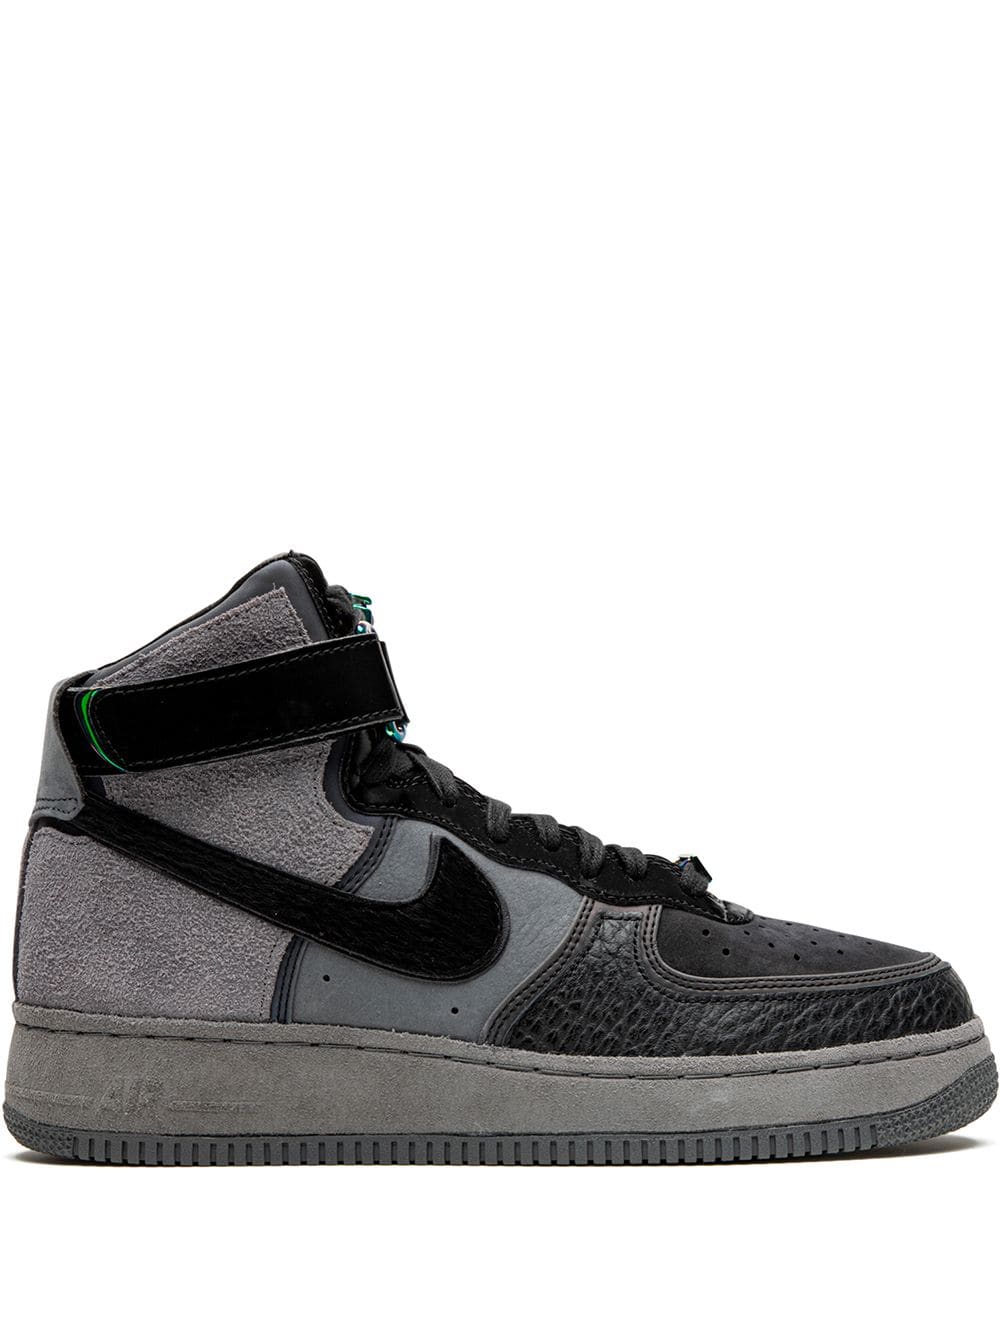 Nike x A Ma Maniére Air Force 1 07 "Hand Wash Cold" sneakers - Grey von Nike